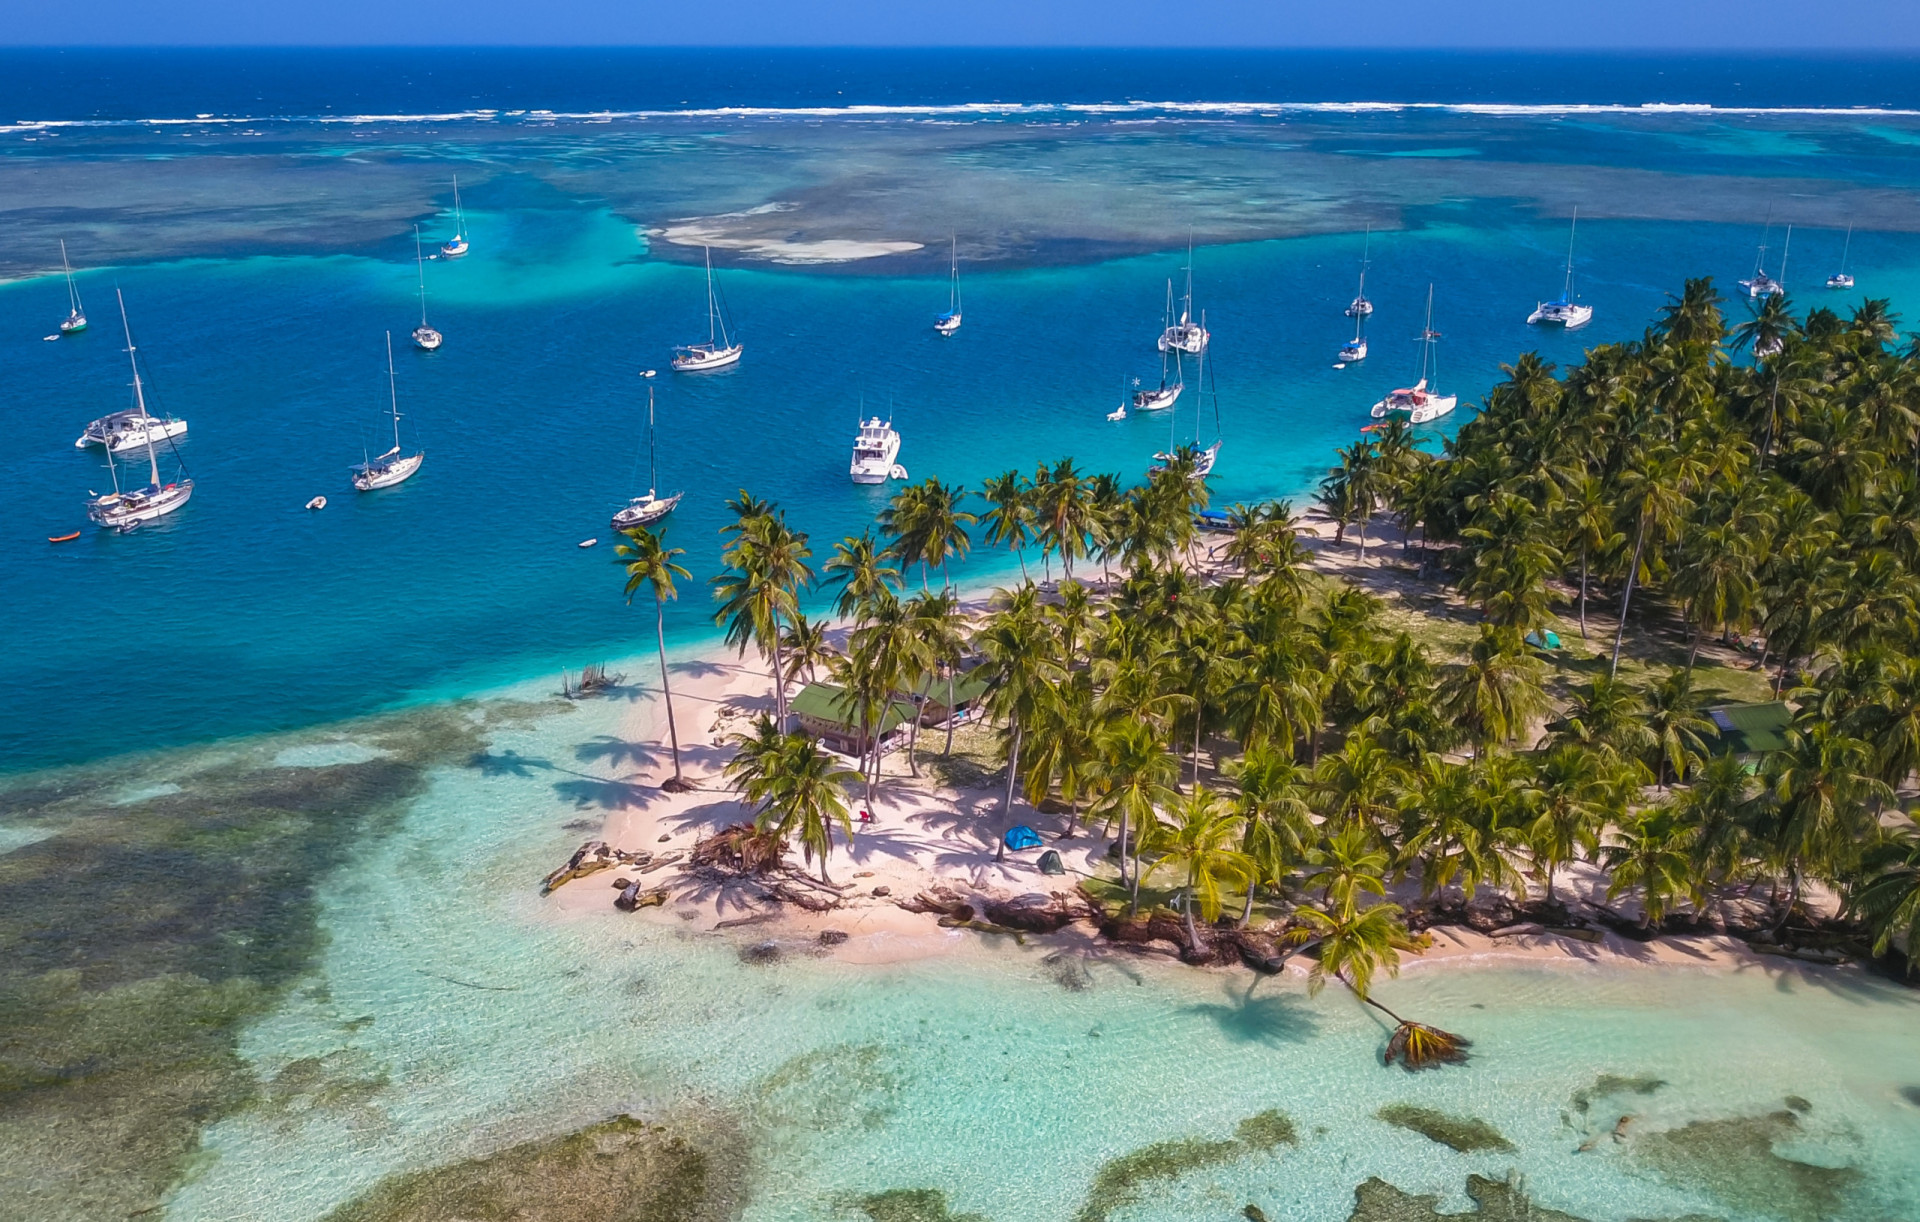 <p>A Central America bucket list favorite, Panama's tranquil San Blas Islands rank among the most picturesque in the Caribbean. This tropical paradise getaway greets the visitor with pristine beaches, crystal-clear waters, and an enviable seafood restaurant scene.</p><p>You may also like:<a href="https://www.starsinsider.com/n/231457?utm_source=msn.com&utm_medium=display&utm_campaign=referral_description&utm_content=627756en-en"> Celebrities you didn't know have LGBTQ parents</a></p>